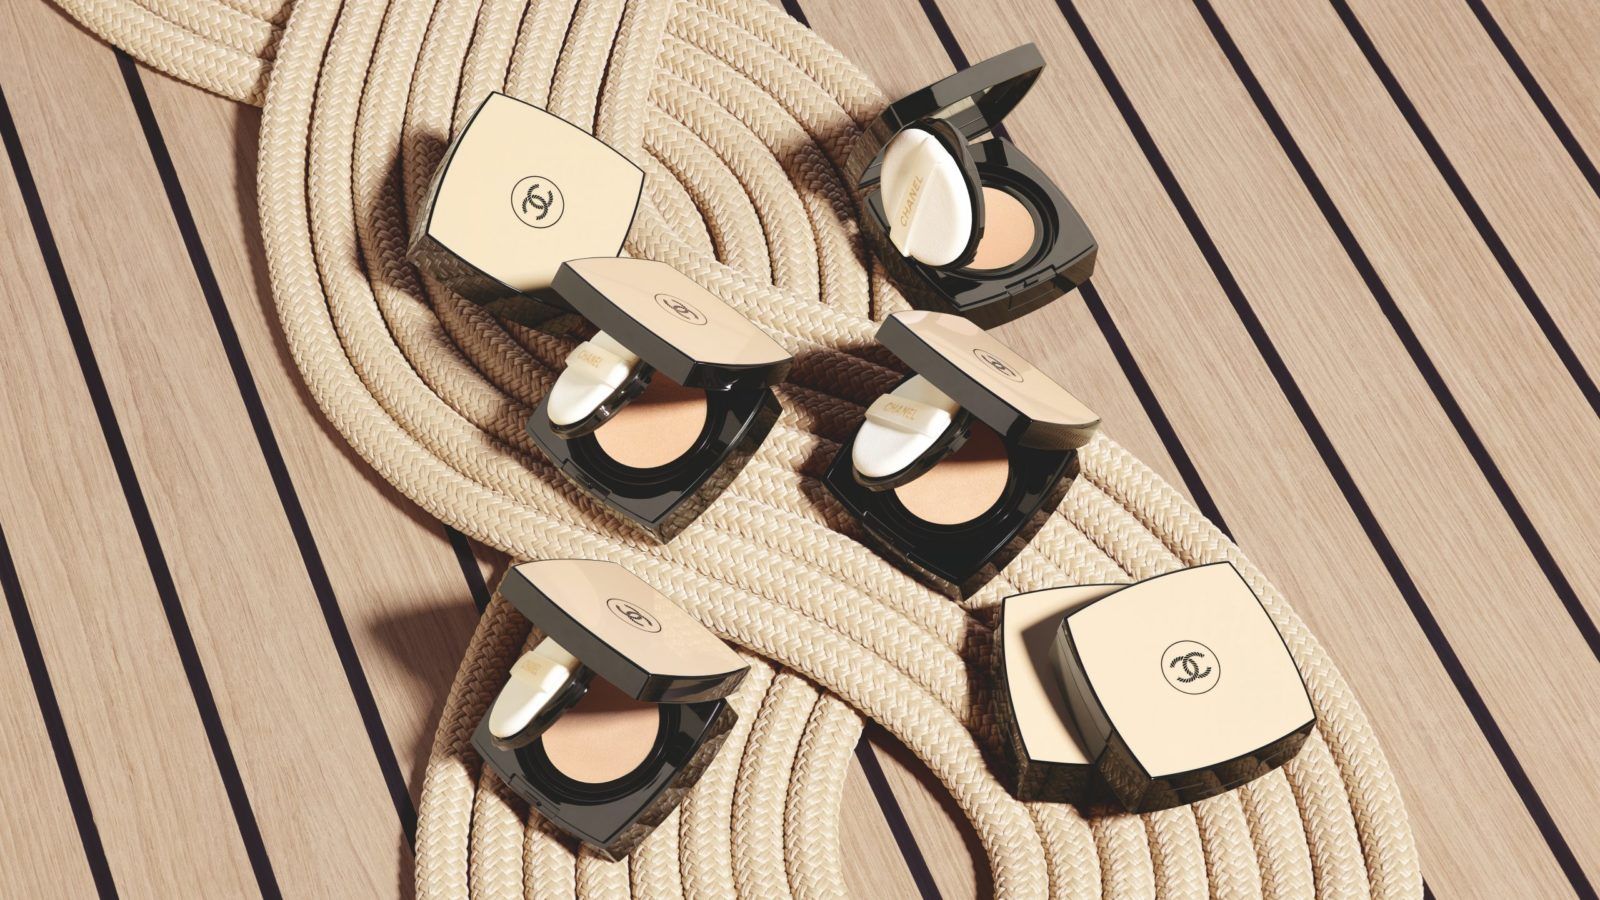 Achieve peak summer glow with Chanel’s latest Les Beiges collection